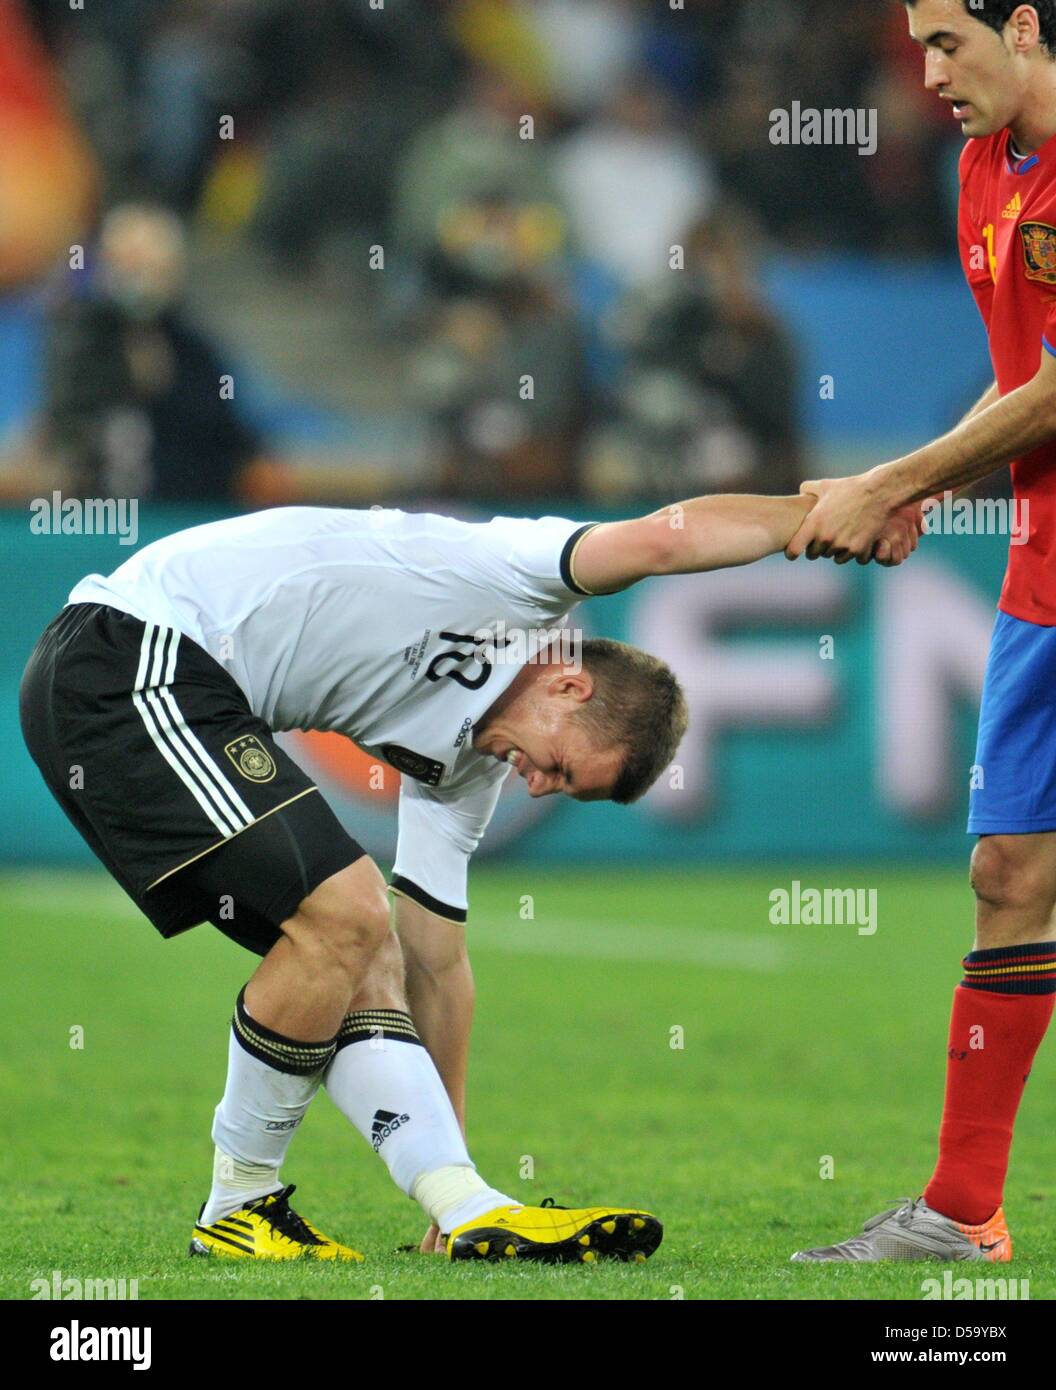 Lukas Podolski (L) of Germany and Sergio Busquets of Spain during the 2010 FIFA World Cup semi-final match between Germany and Spain at the Durban Stadium in Durban, South Africa 07 July 2010. Photo: Bernd Weissbrod dpa - Please refer to http://dpaq.de/FIFA-WM2010-TC  +++(c) dpa - Bildfunk+++ Stock Photo